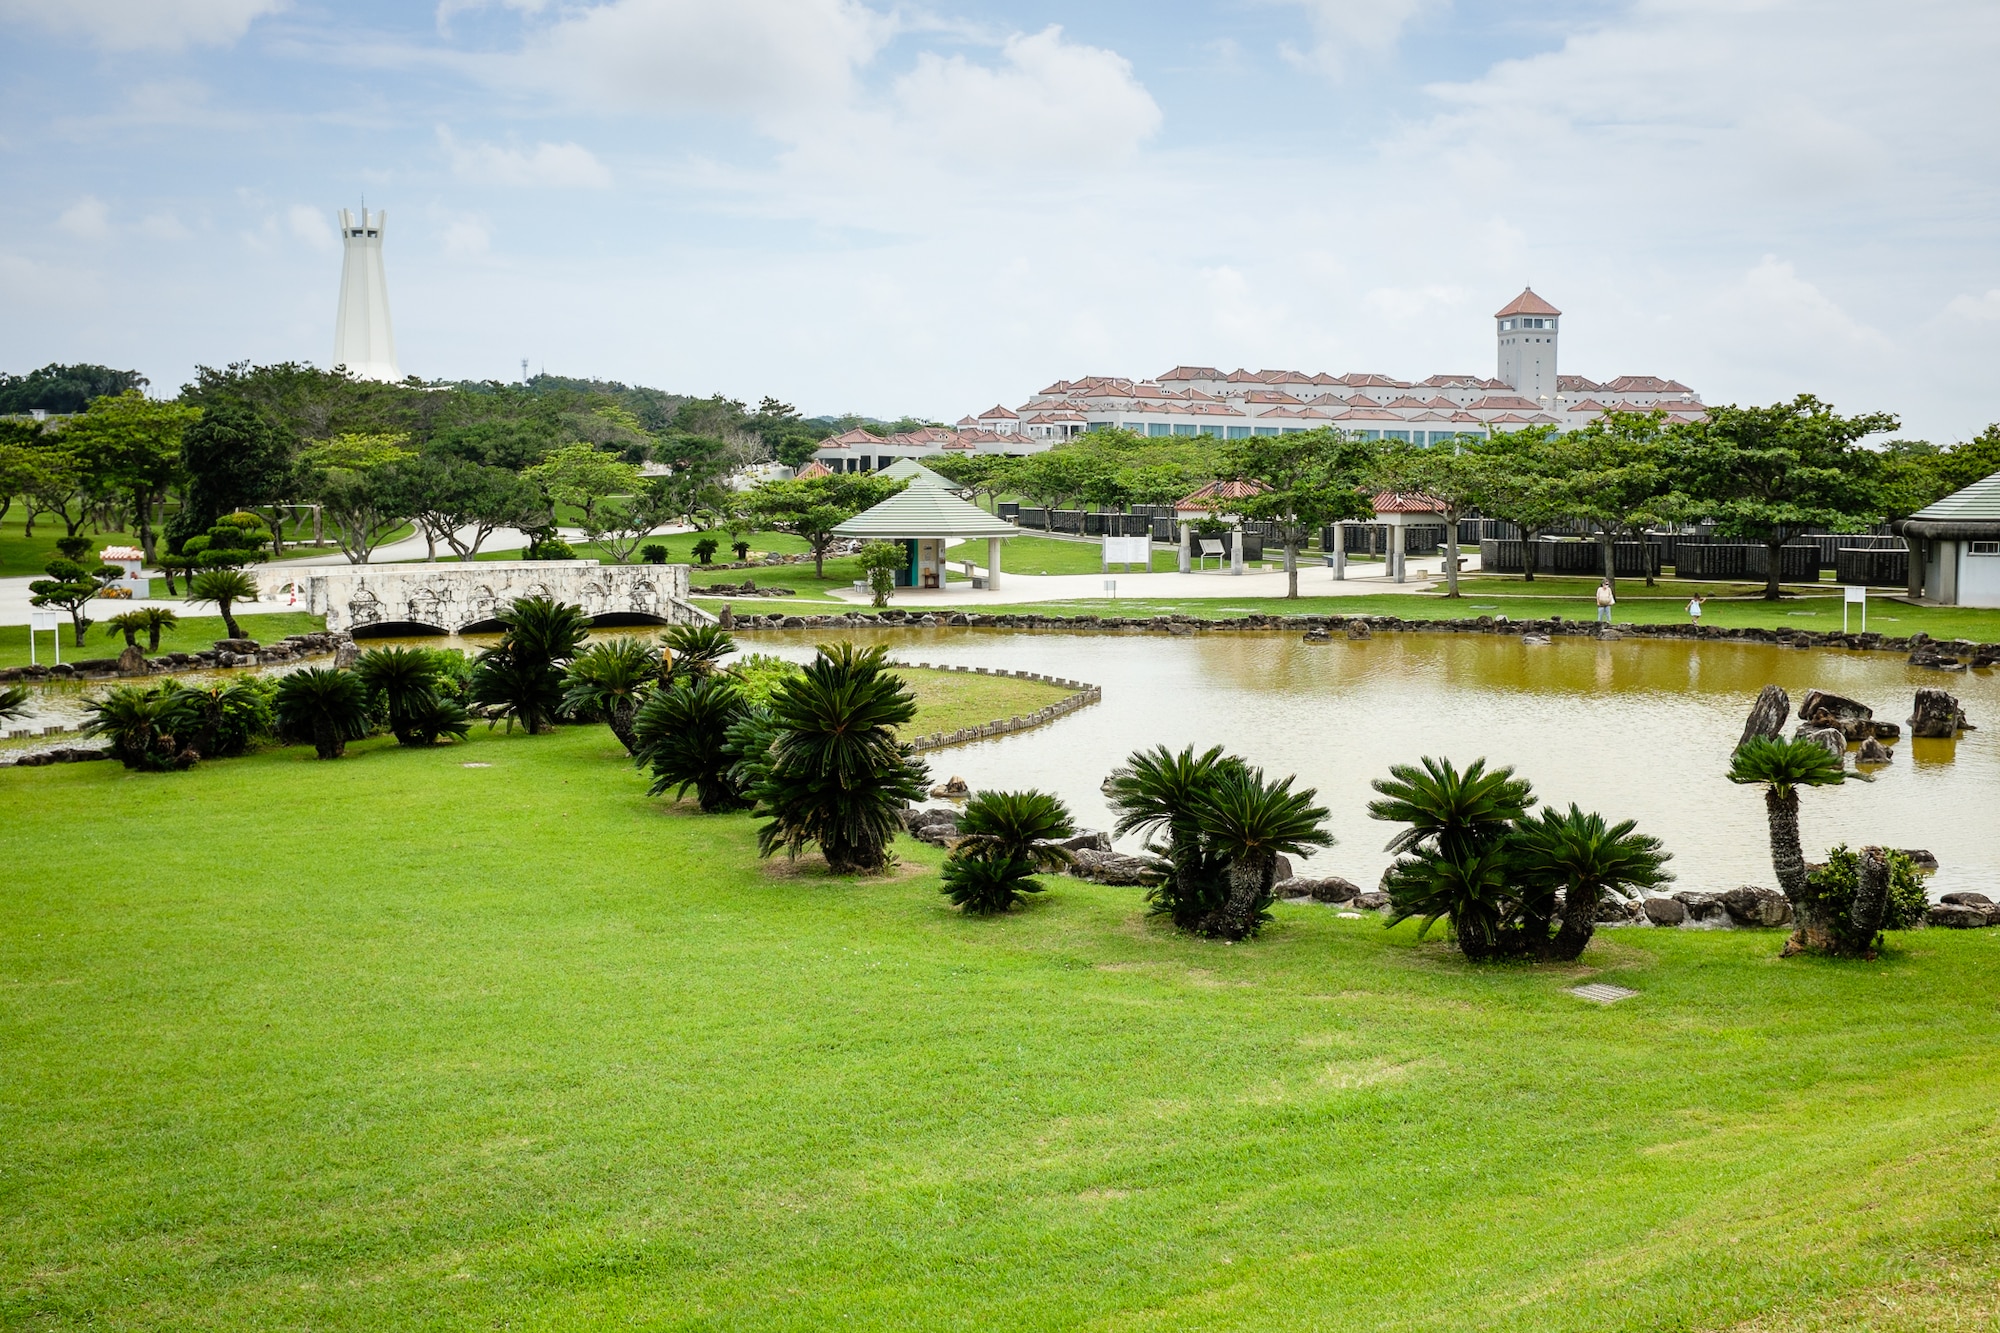 The Okinawa Prefectural Peace Memorial Museum is located near Mabuni Hill, also known as Hill 89, in Itoman City, Okinawa. Mabuni Hill was where the Battle of Okinawa ended June 22, 1945. Also on the museum grounds is The Cornerstone of Peace, which lists more than 240,000 names etched in stone of those who died in the Battle of Okinawa, and Memorial Path, which has 32 memorials. (U.S. Air Force photo by Tech. Sgt. Alexy Saltekoff)